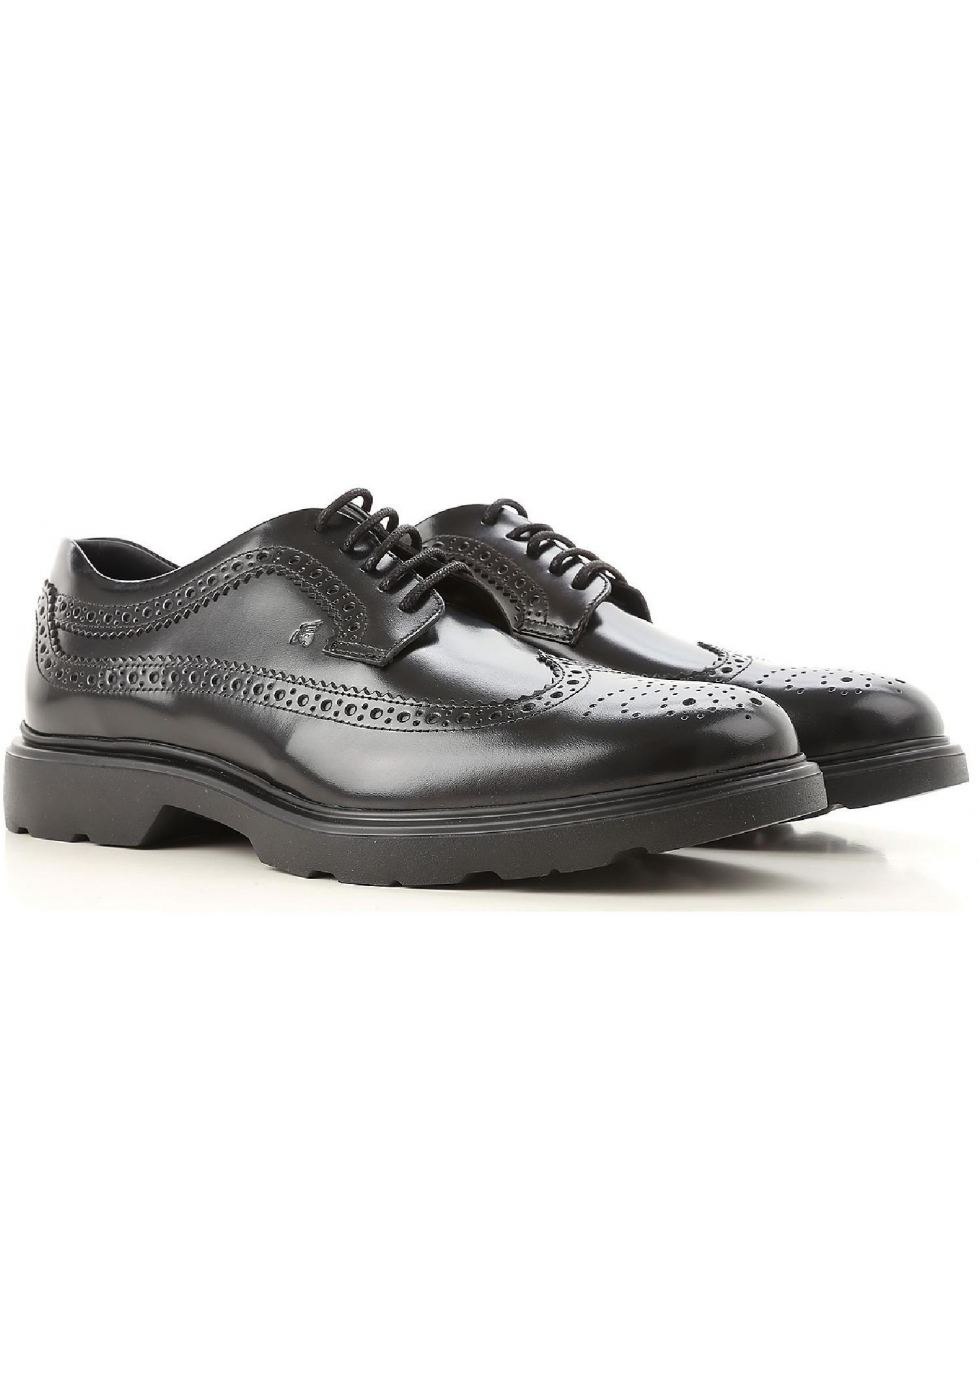 Hogan H393 DERBY men's lace ups in shiny black leather with brogue ...